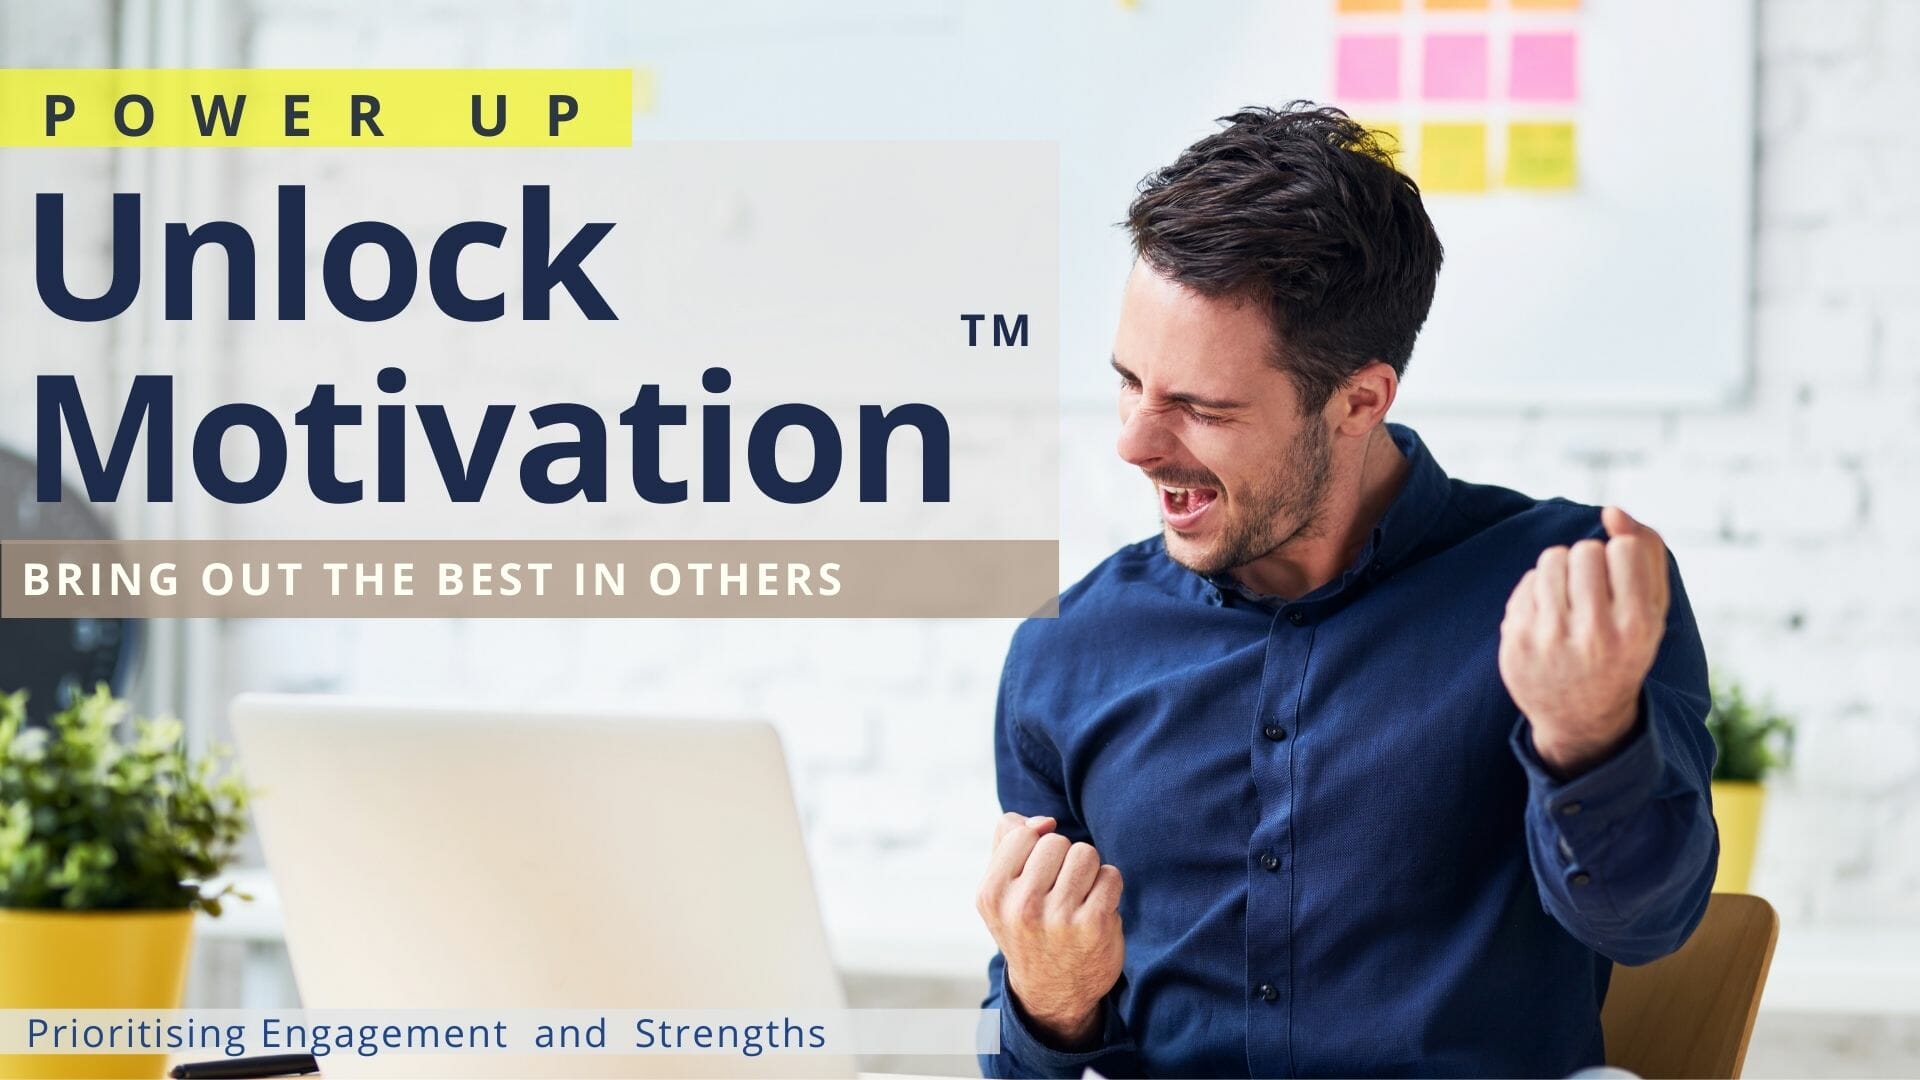 Unlock Motivation bring out the best in your team